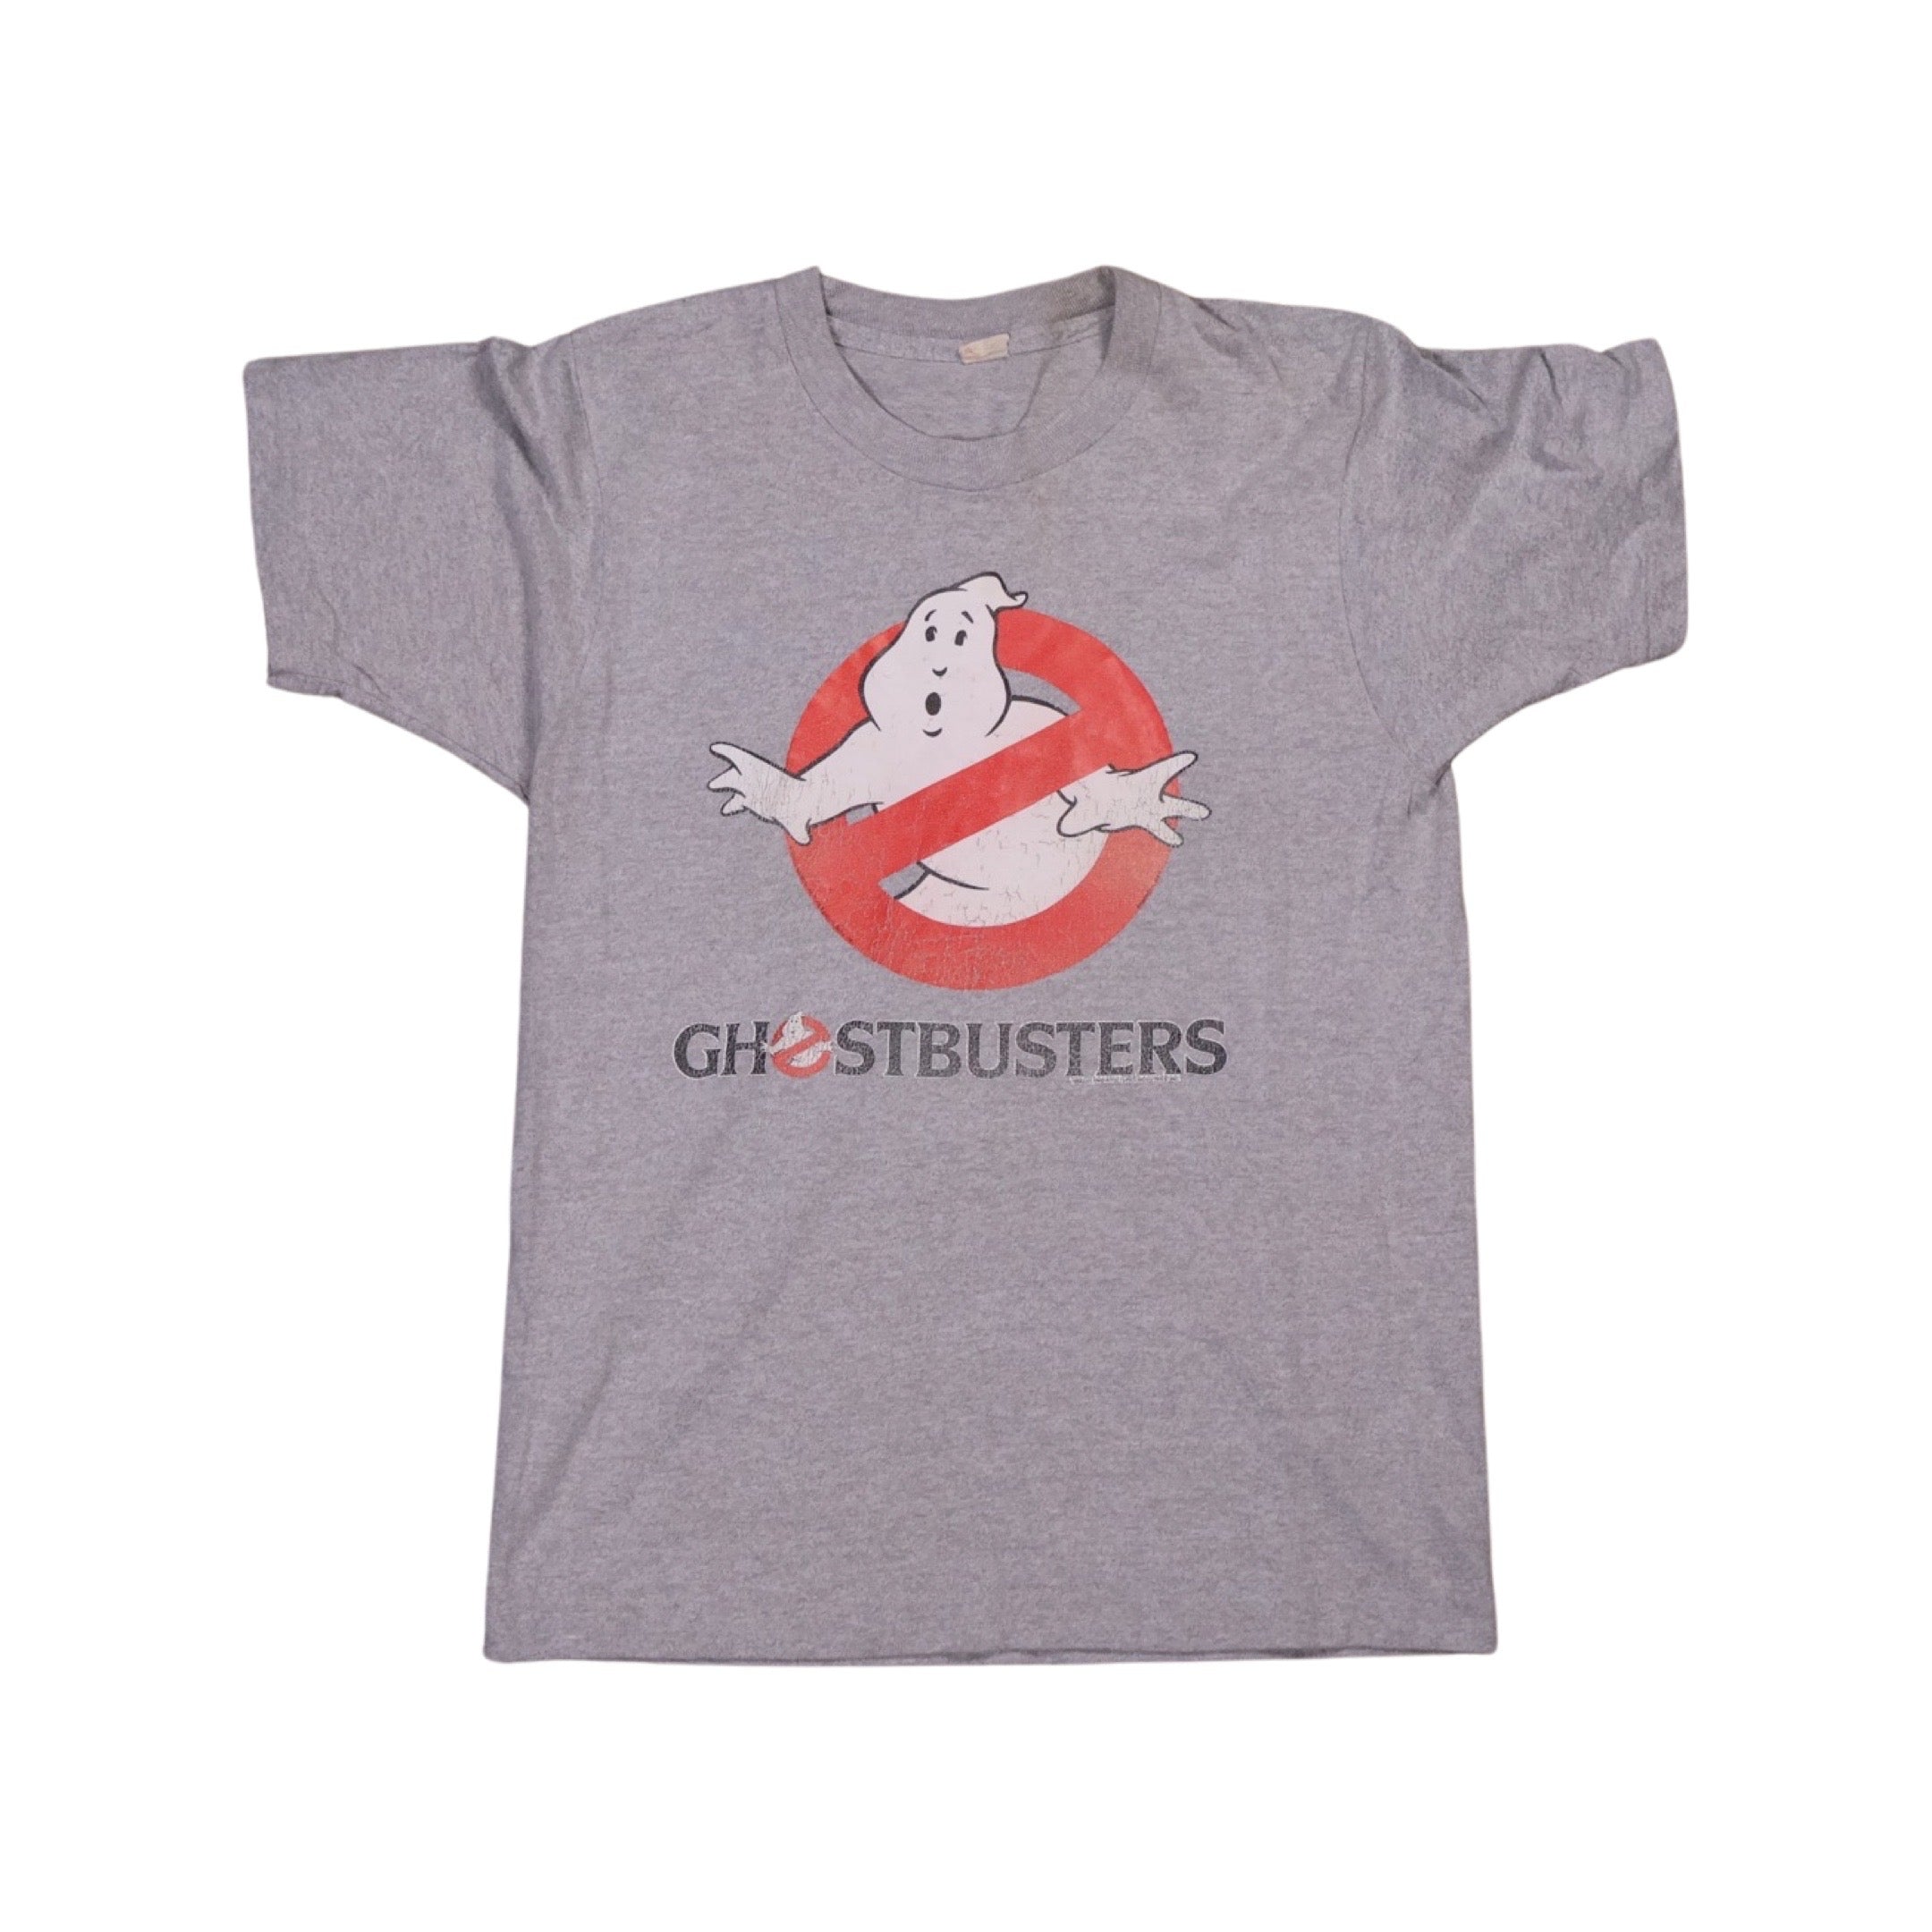 Ghostbusters 1984 T-Shirt (Small)